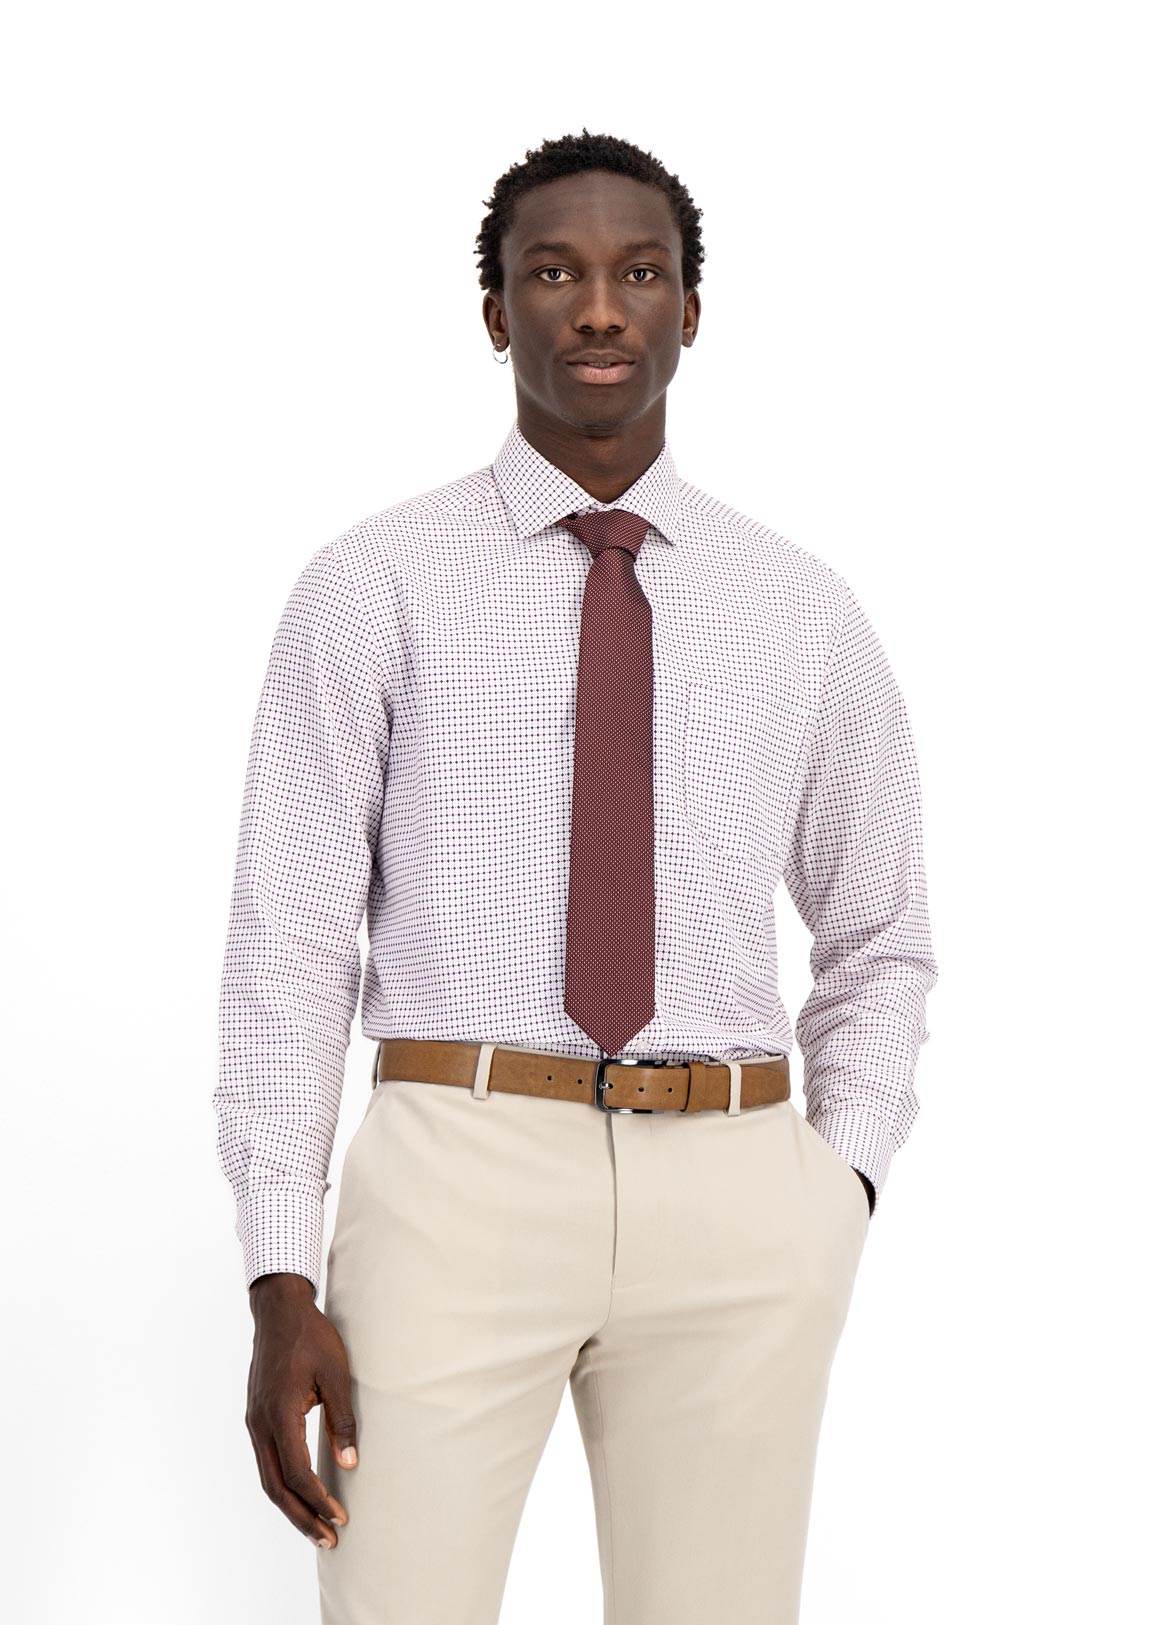 Micro Spot Tie | Woolworths.co.za